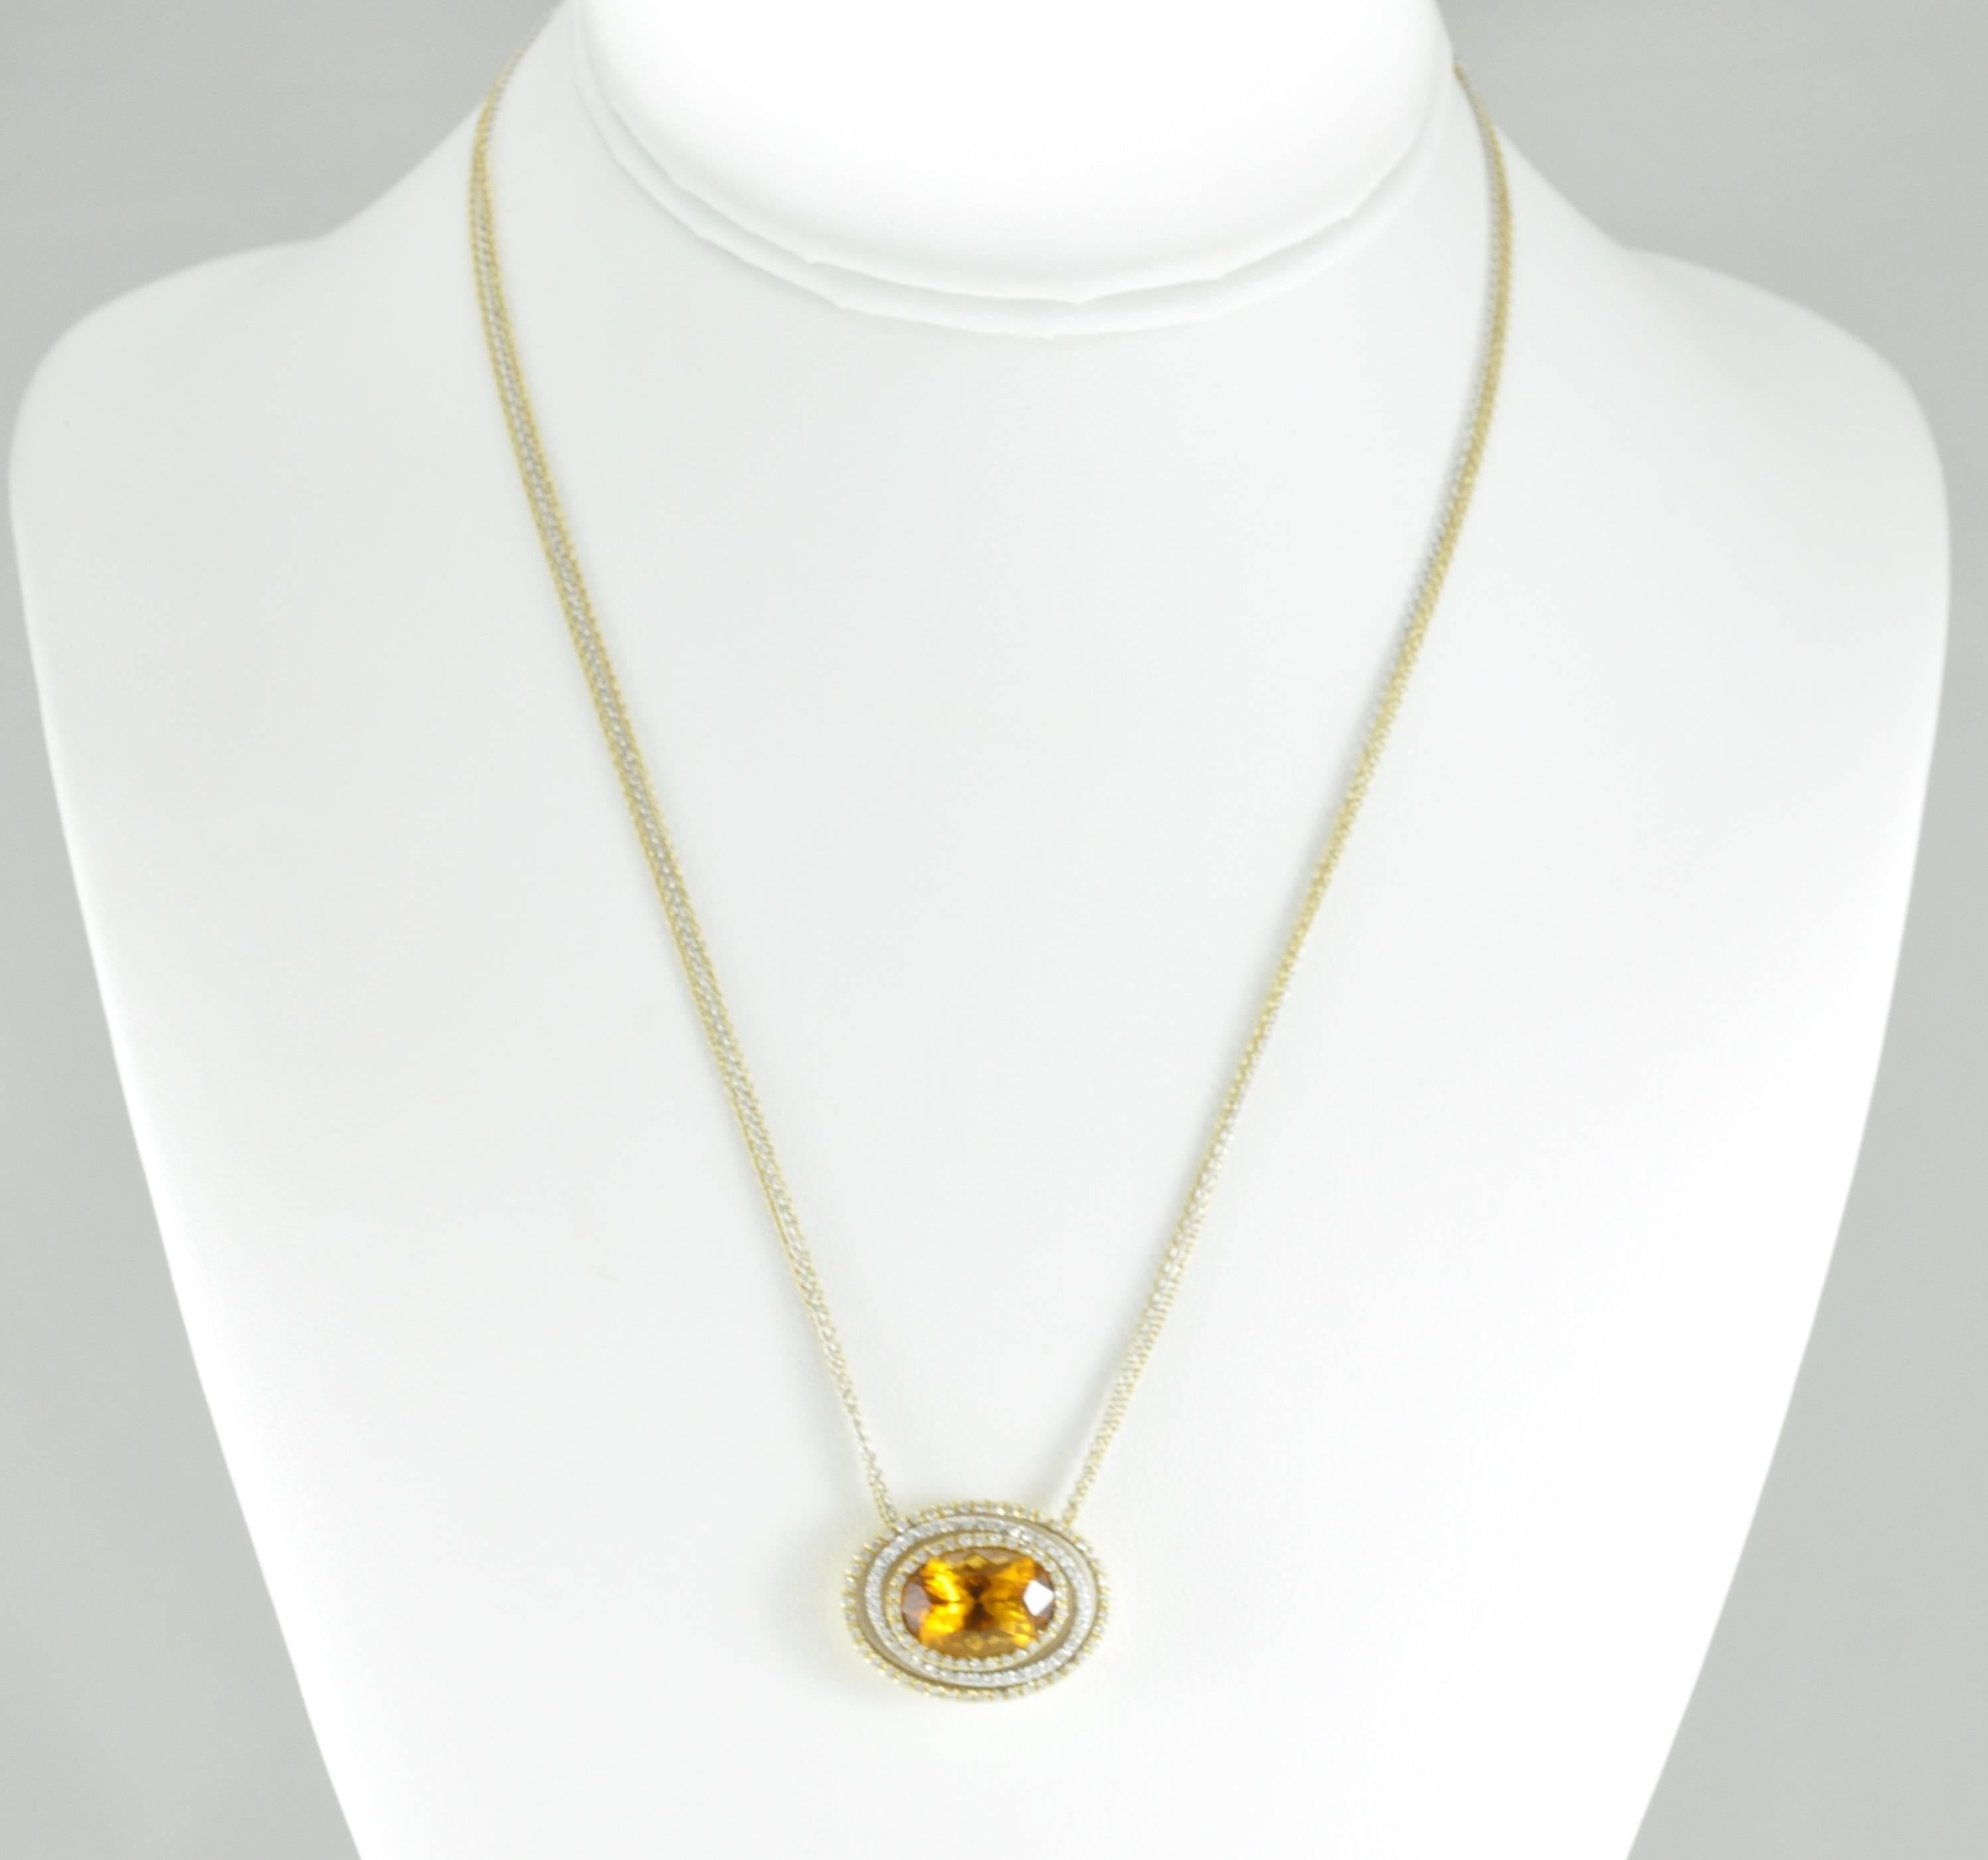 18k Yellow Gold Citrine Oval Pendant with 3 Rows of Diamonds on Triple Chain. The Chain consists of two Yellow strands and one White Gold strand. This piece also has a beautiful toggle clasp with 6 round diamonds on the toggle bar.
The necklace has